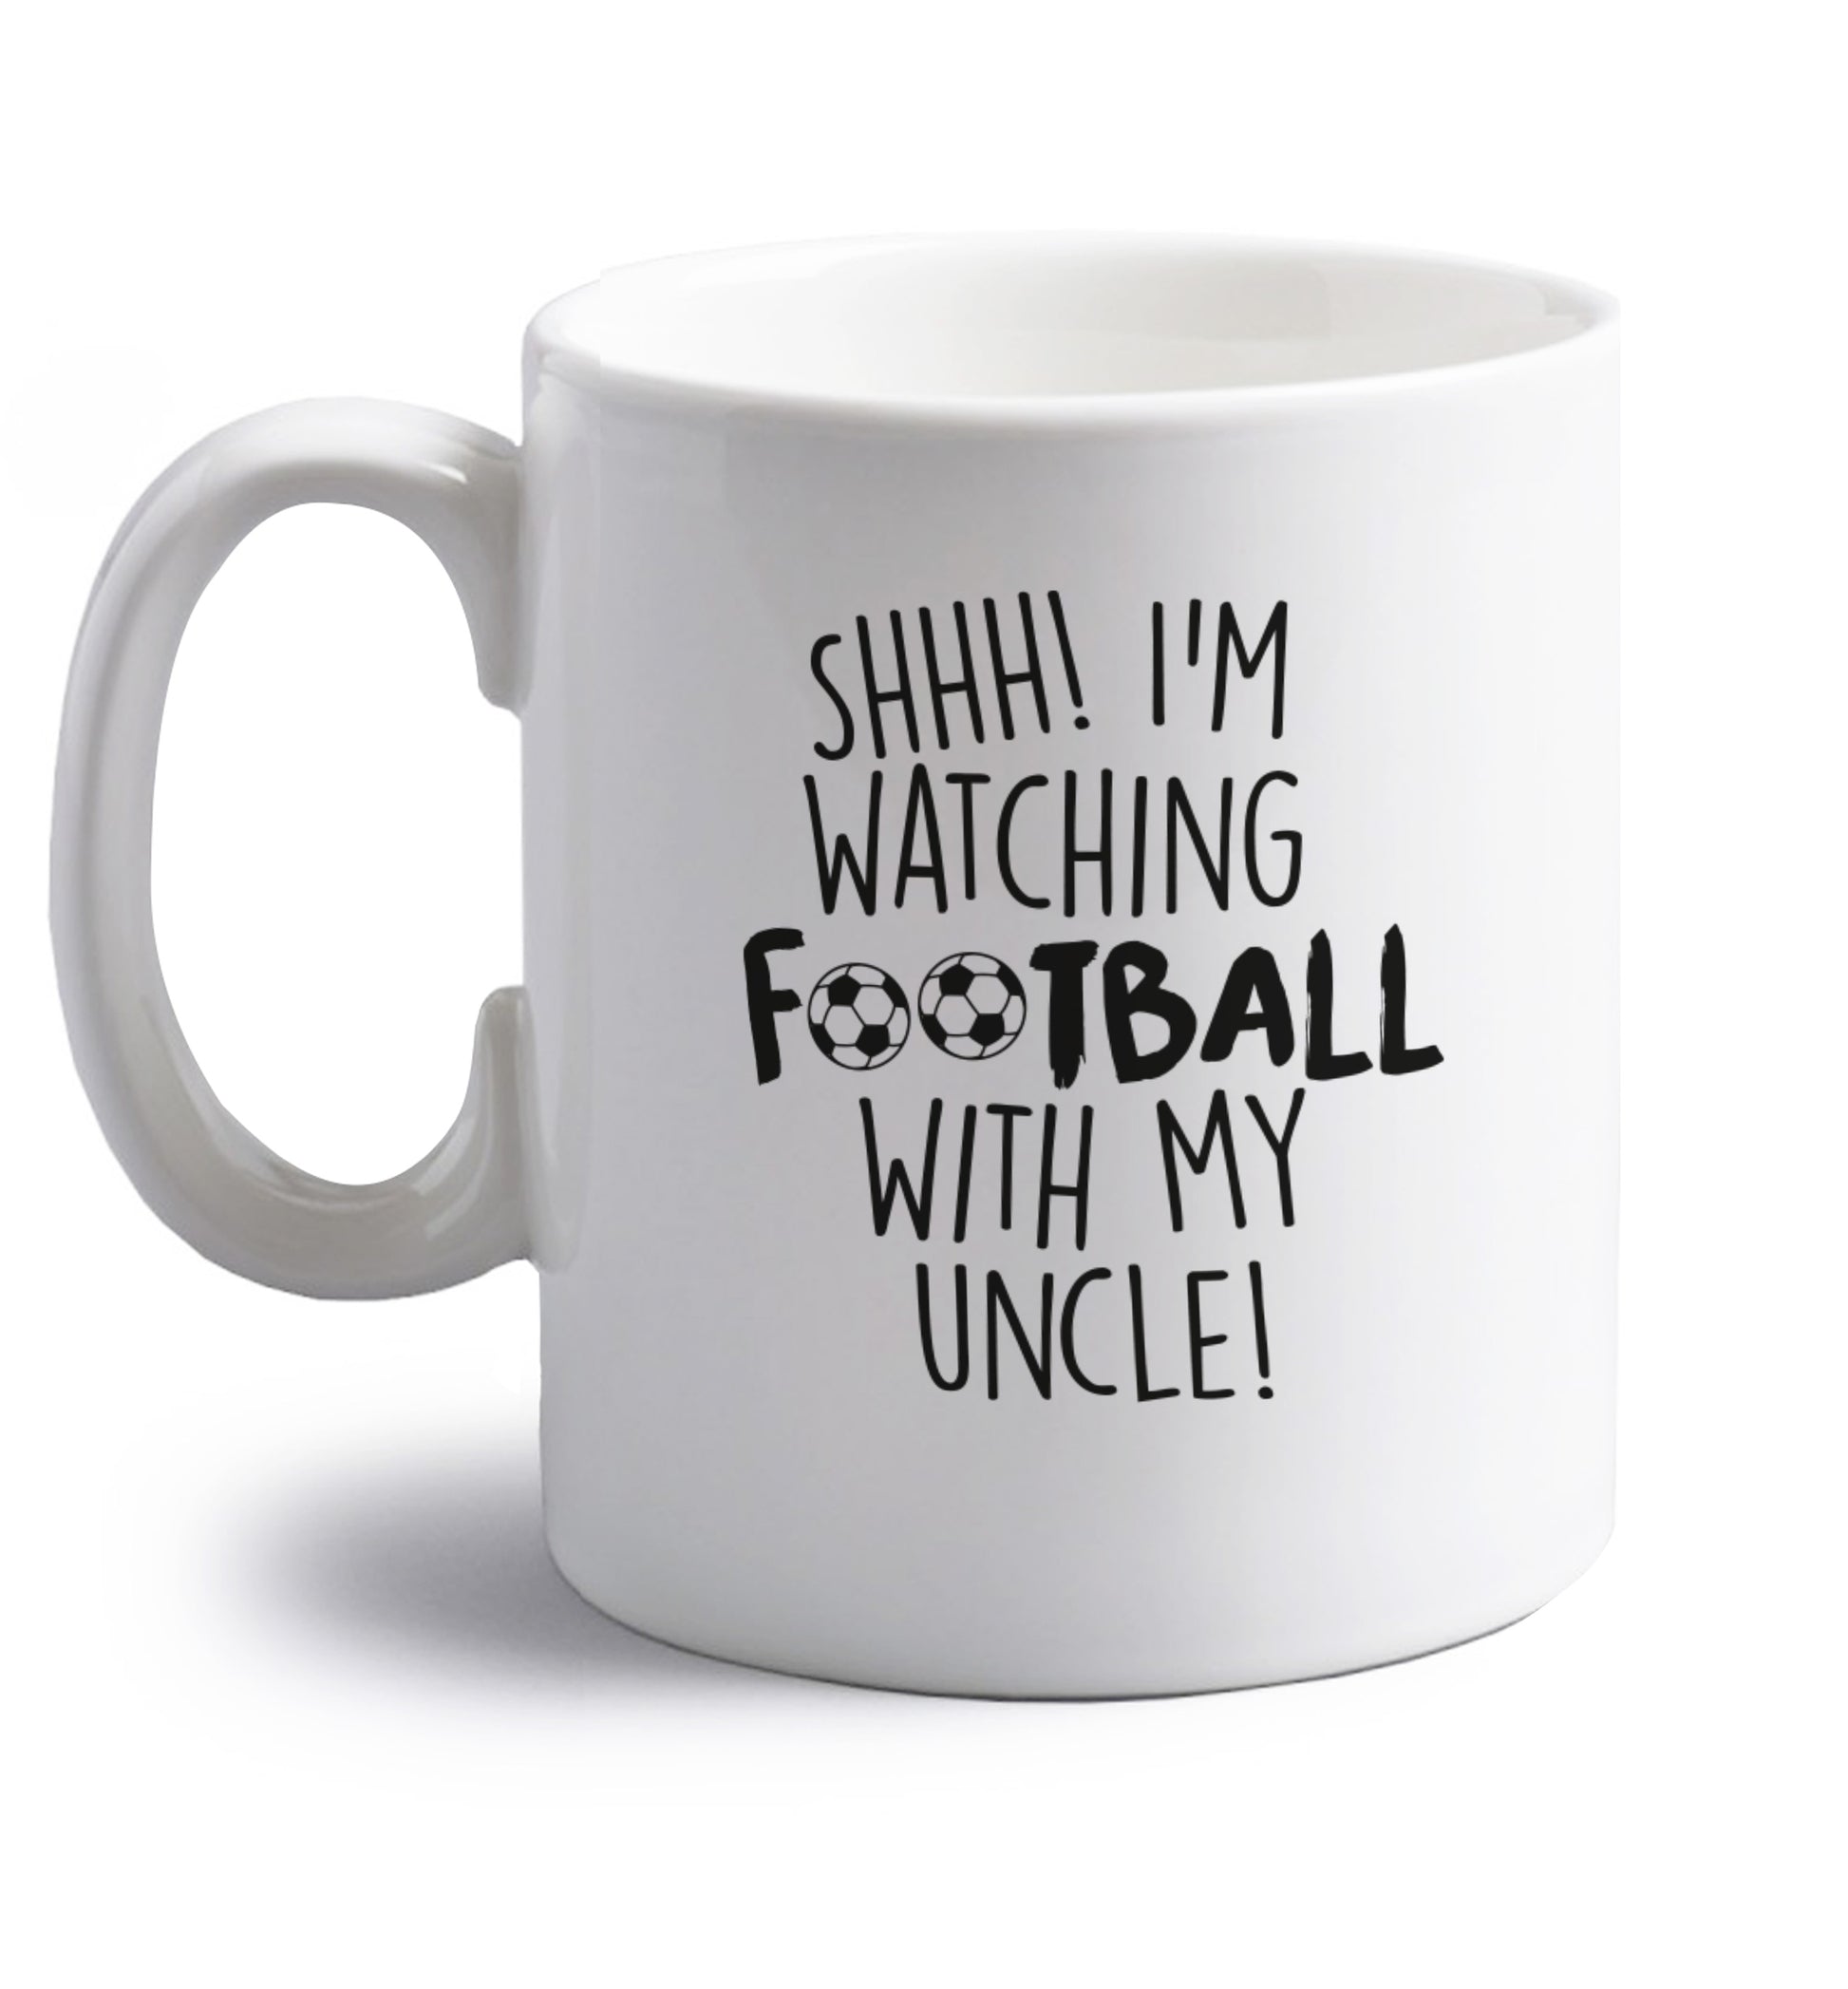 Shhh I'm watching football with my uncle right handed white ceramic mug 